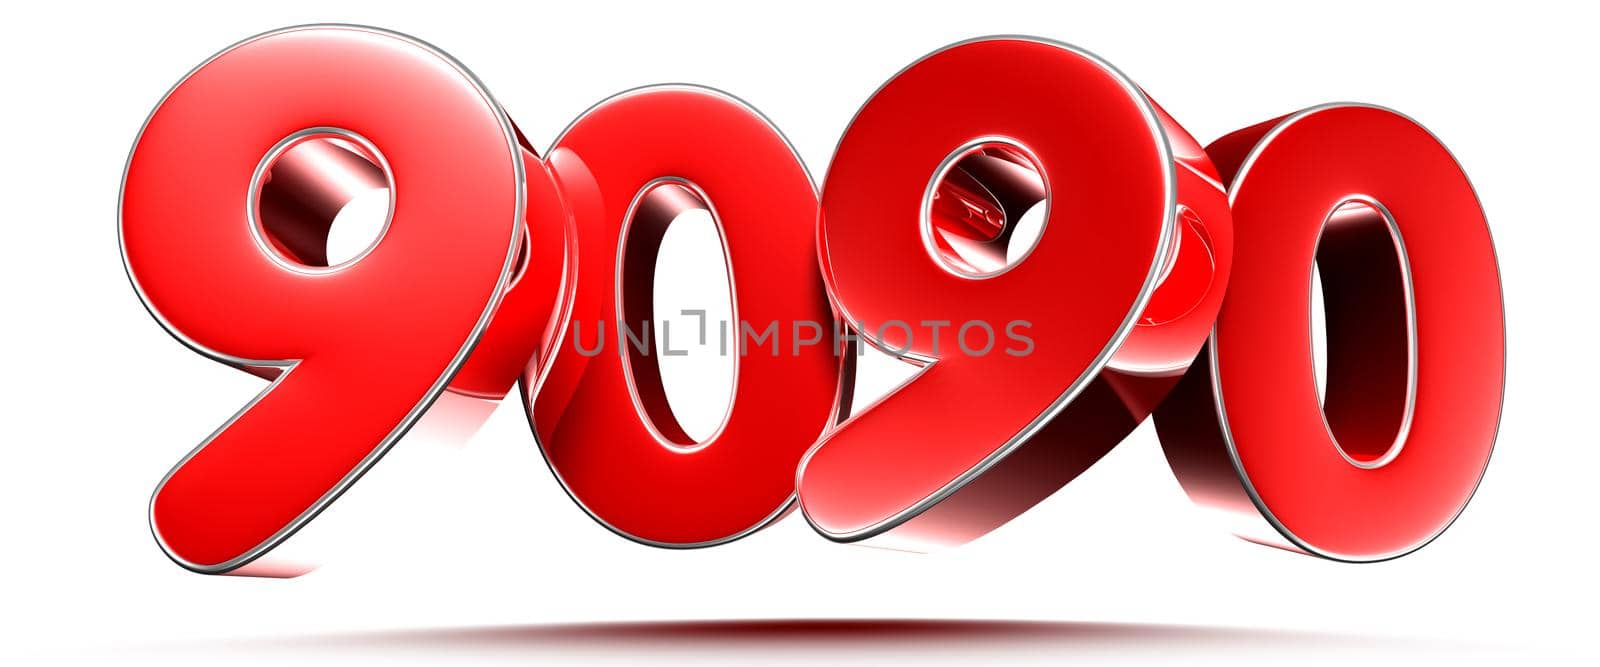 Rounded red numbers 9090 on white background 3D illustration with clipping path by thitimontoyai